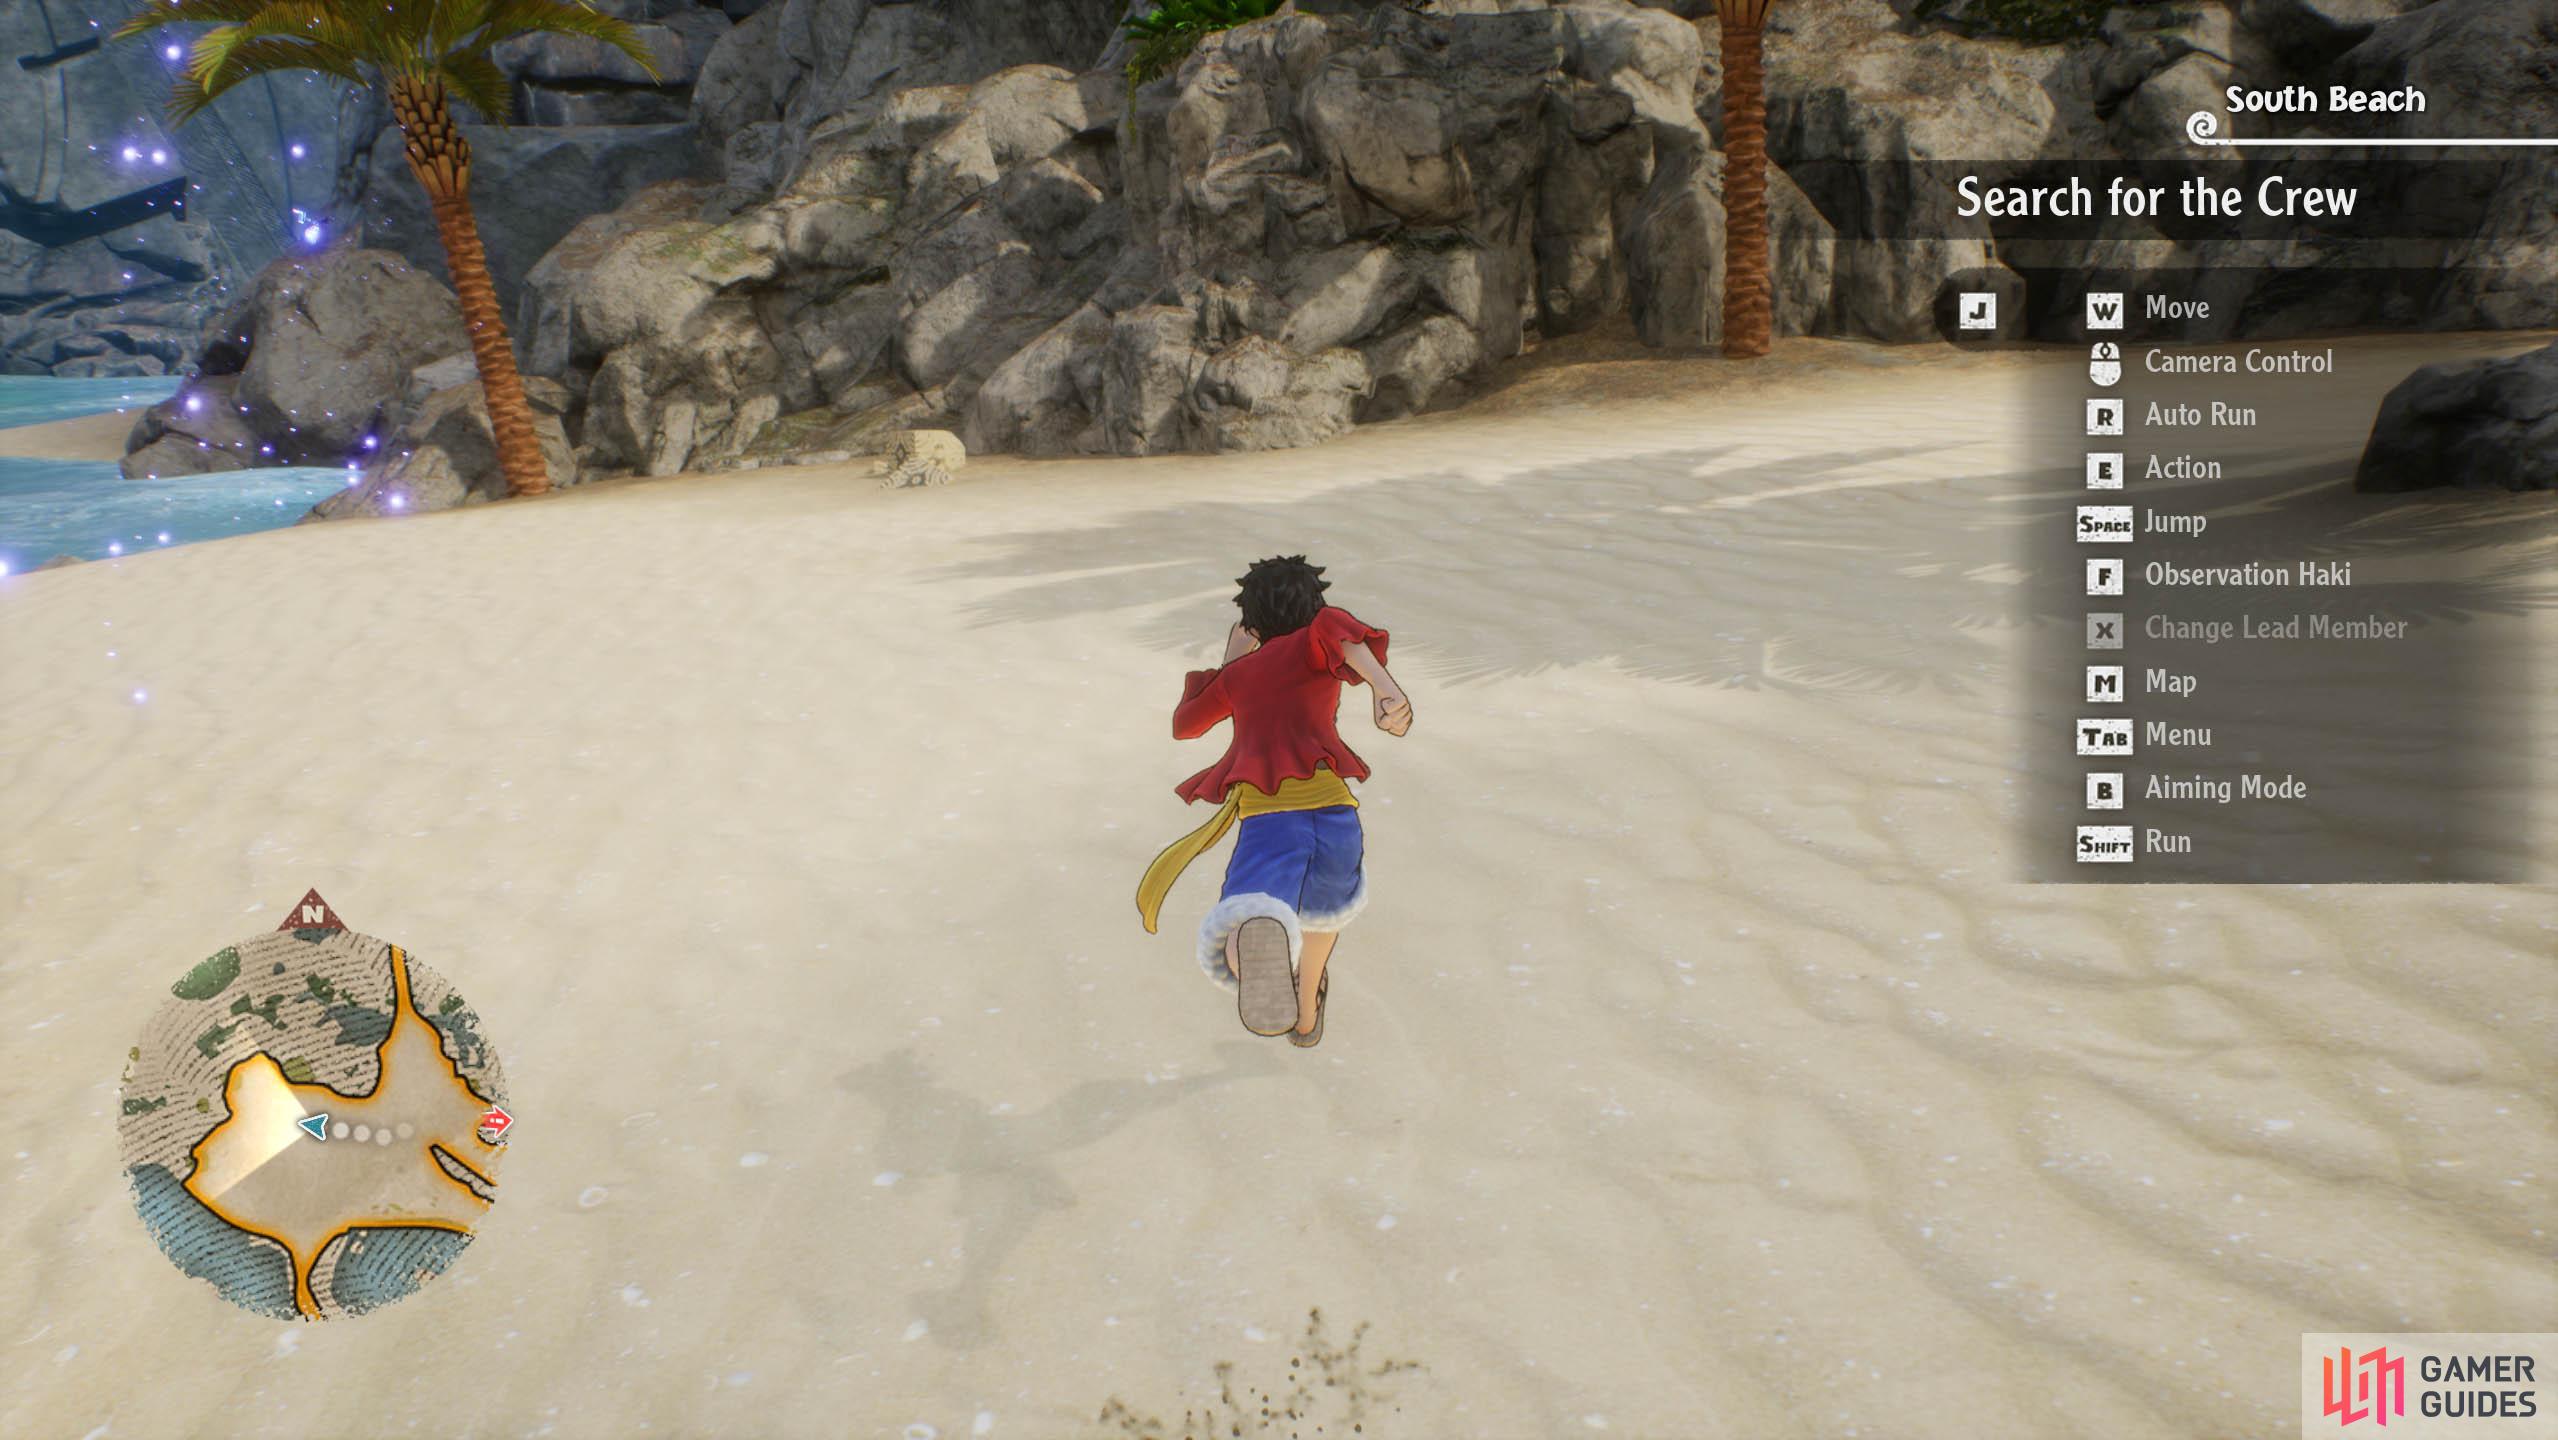 Being able to move across land much quicker is a real bonus in One Piece Odyssey